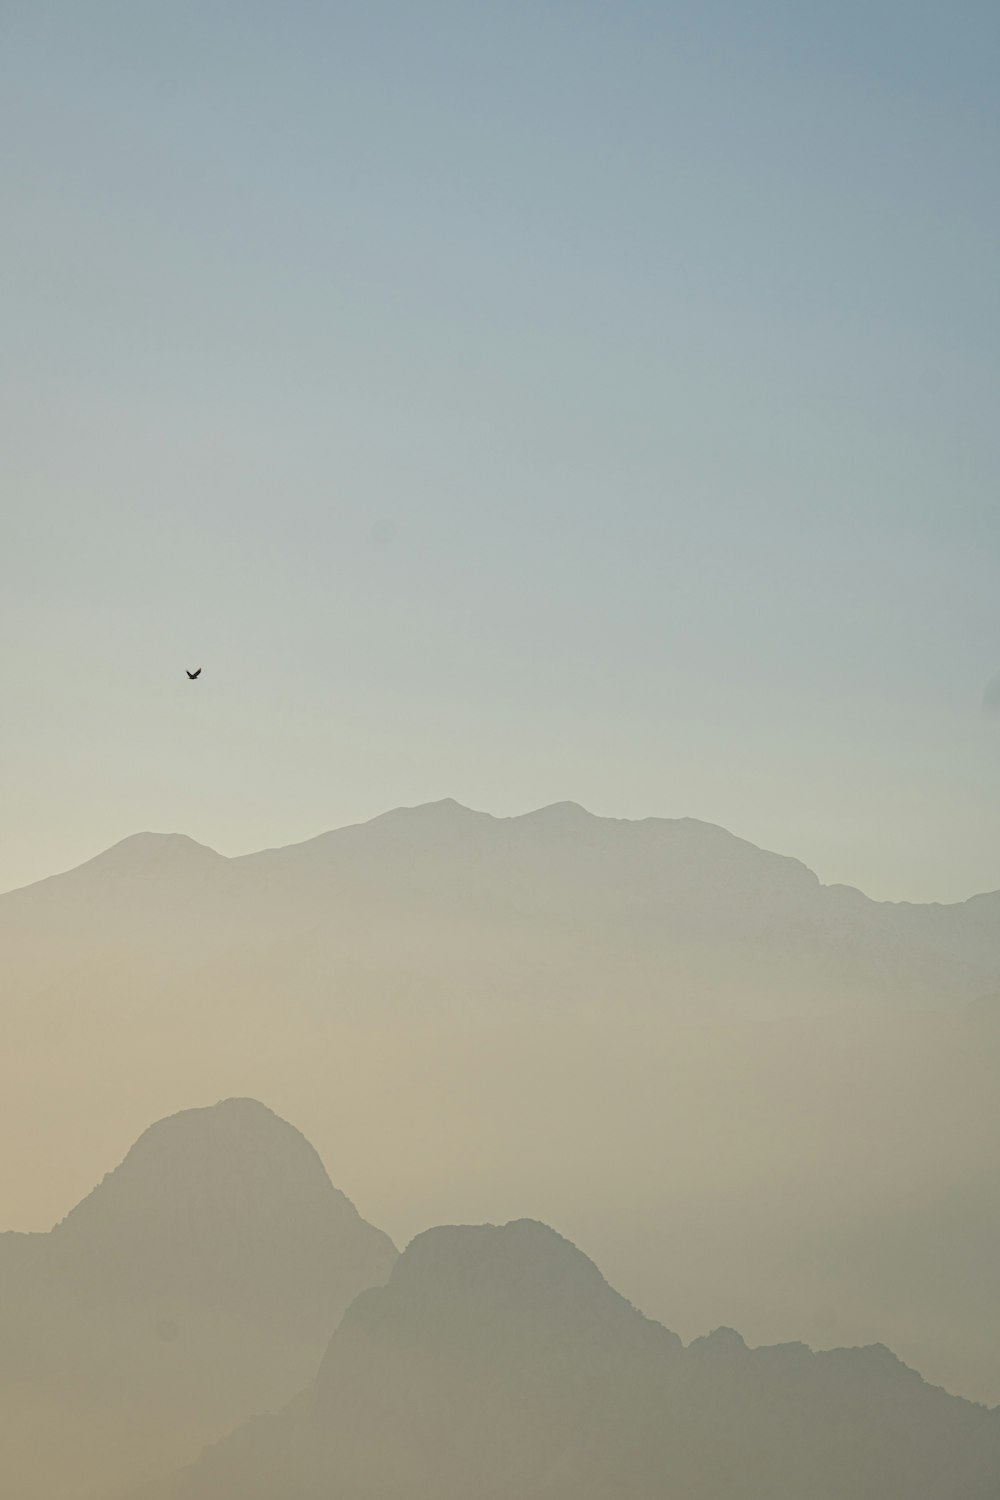 a bird flying in the sky over a mountain range